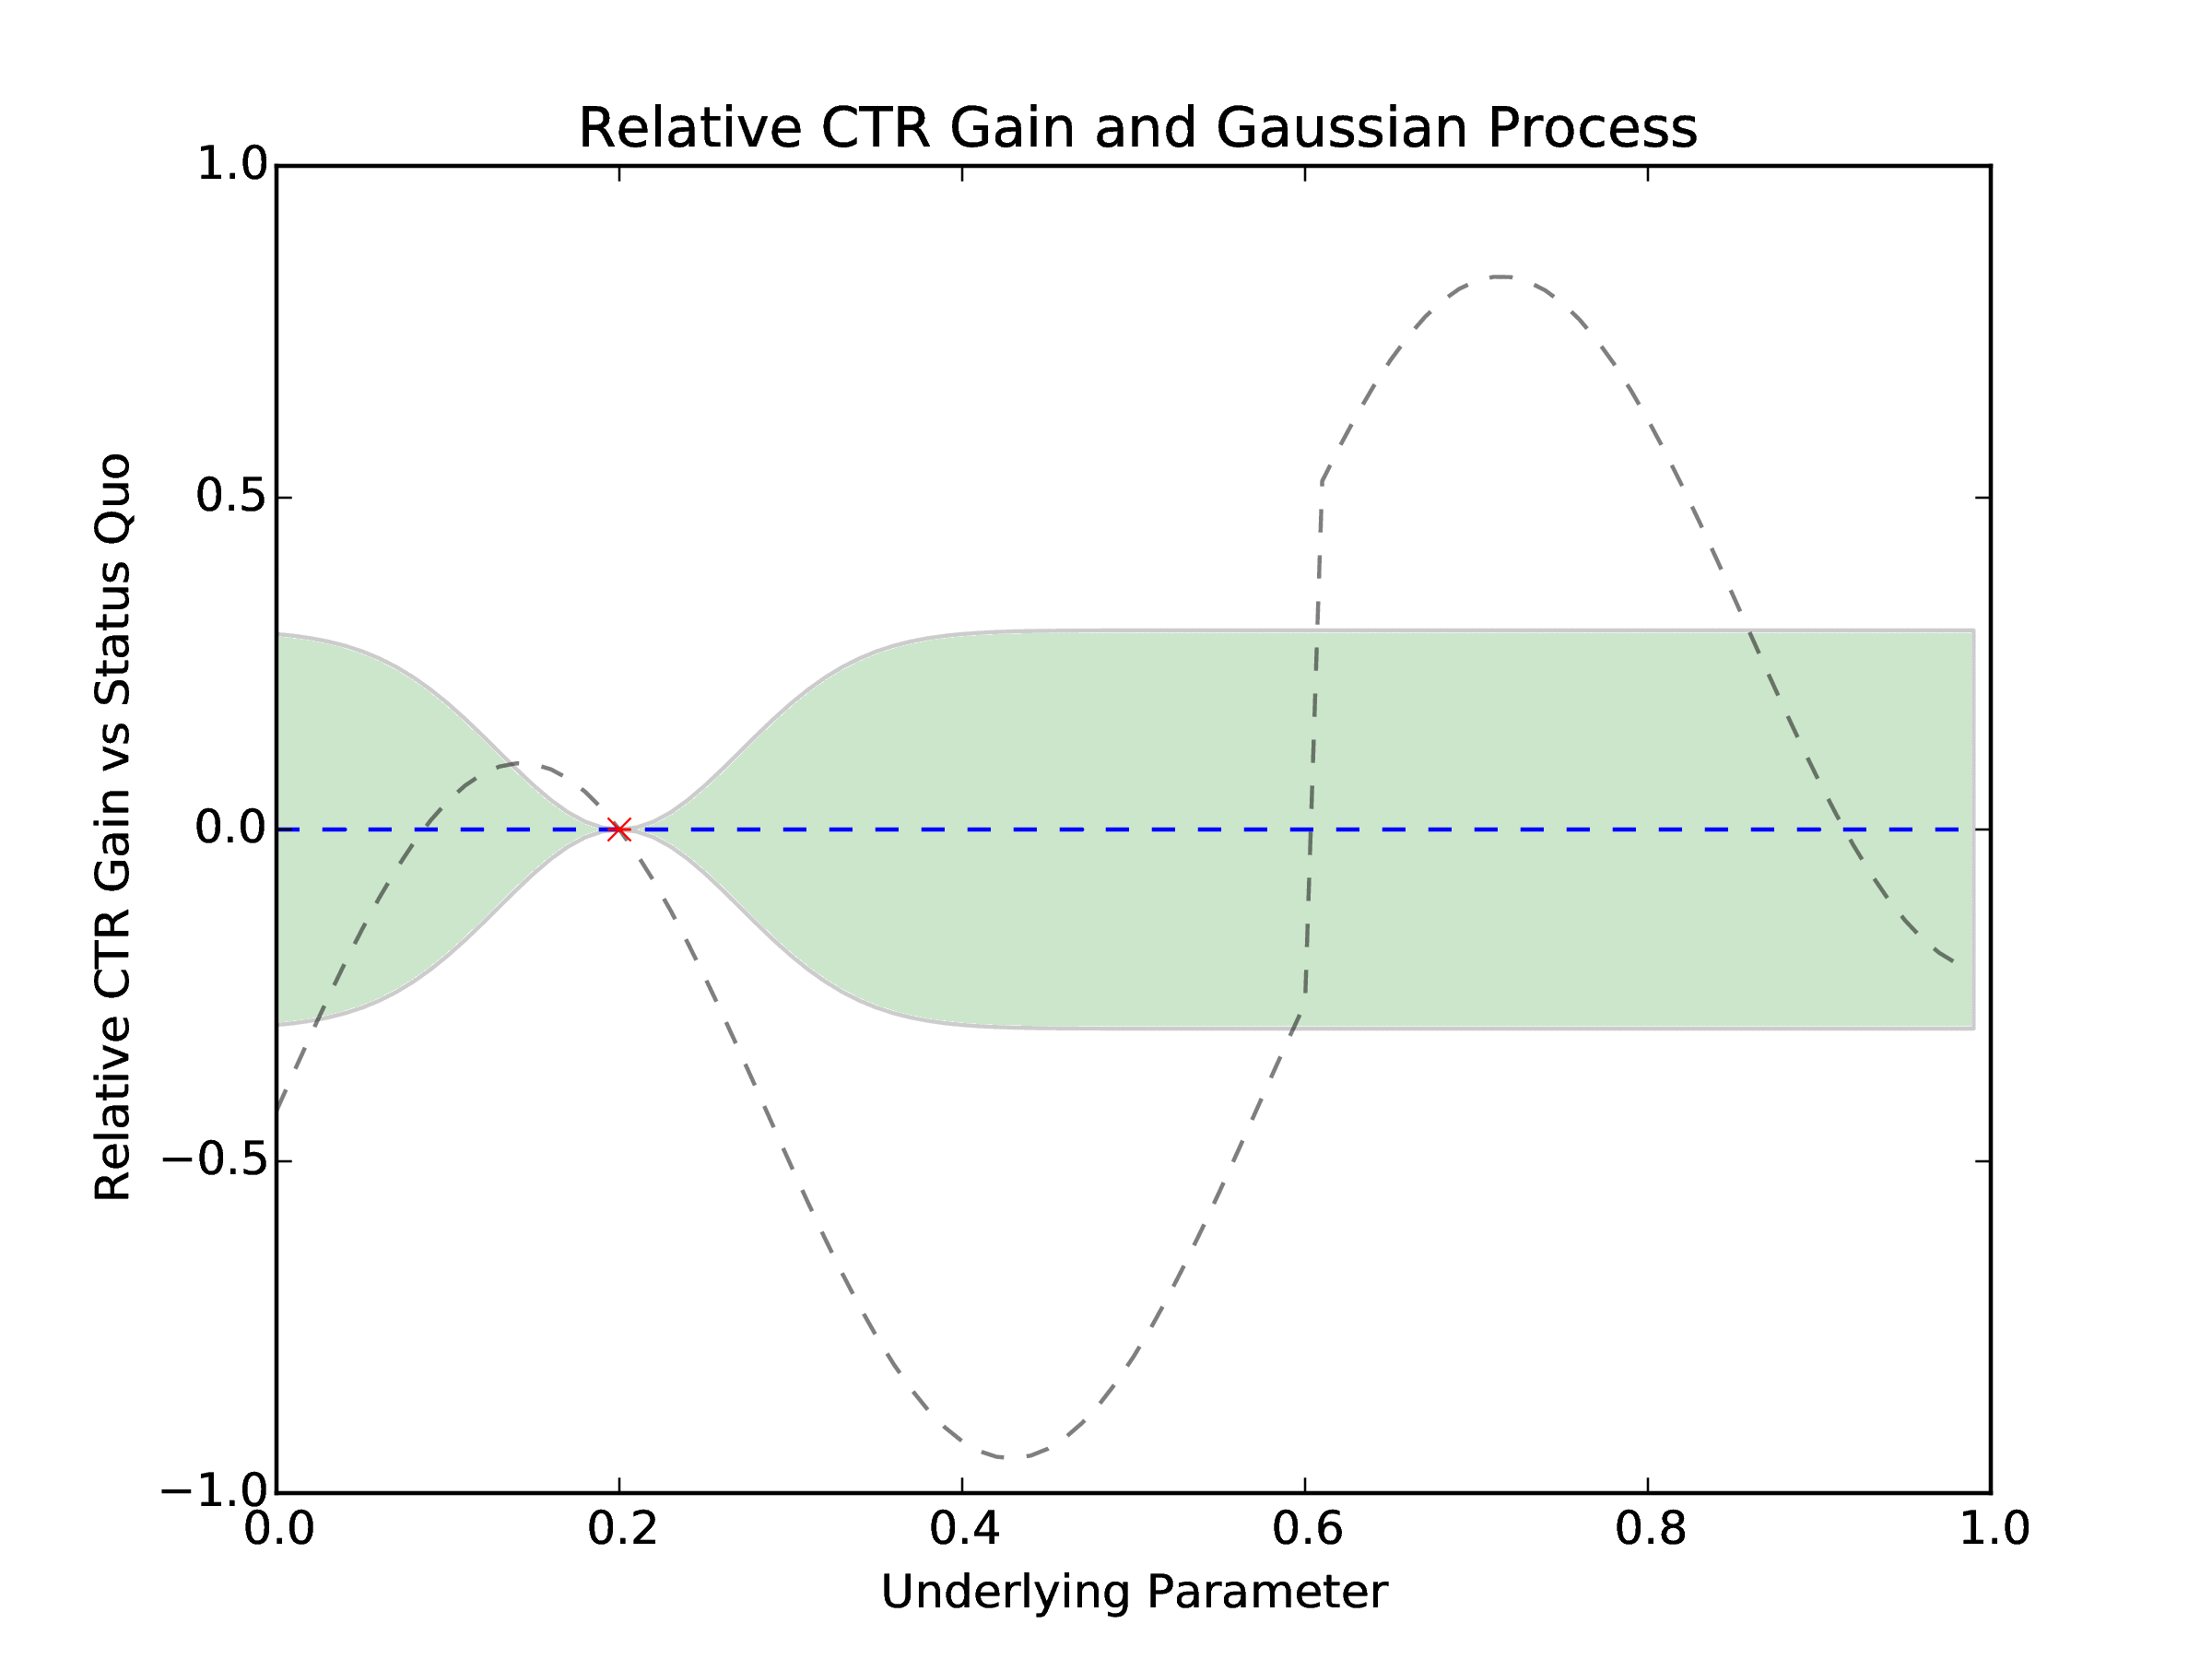 Figure 4: The new points be sampled each day (red x) and previous points (blue x) influence the Gaussian Process representation of the relative CTR gain that MOE uses to optimize the underlying parameter. We can see the Gaussian Process getting more accurate with respect to the true function (dashed gray) as more points are sampled.